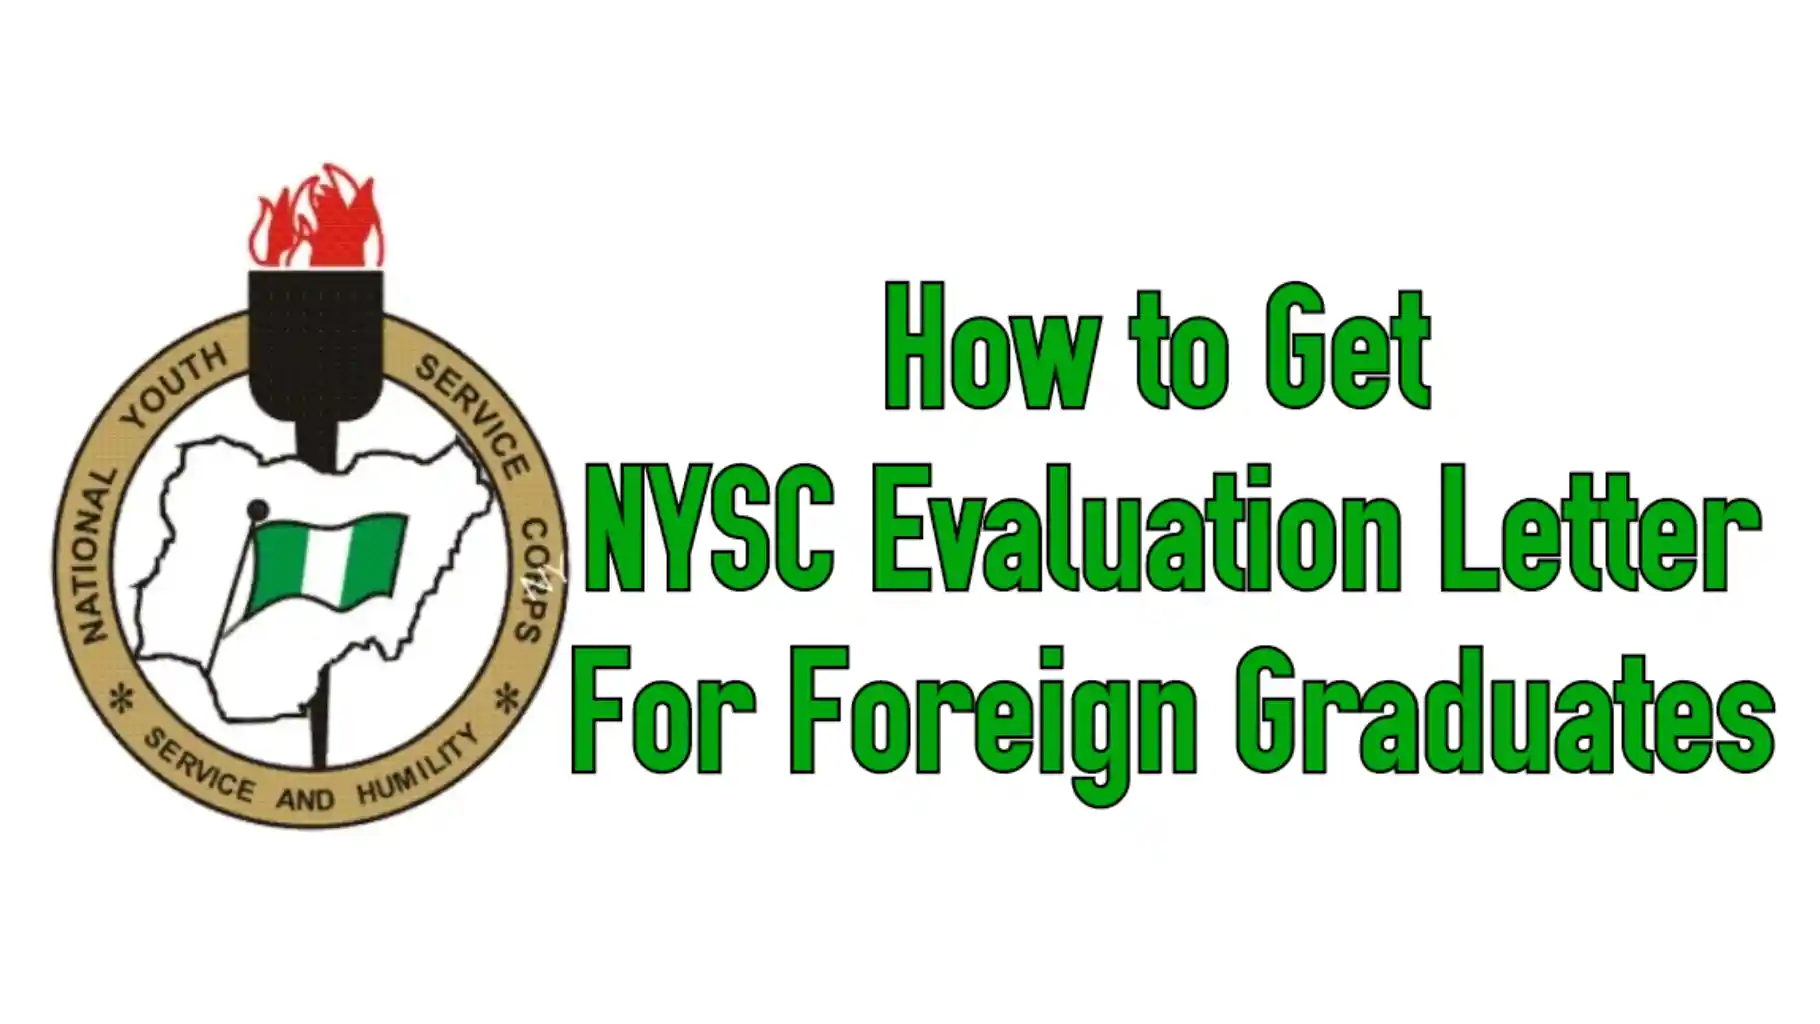 How to Get NYSC Evaluation Letter for Foreign Graduates